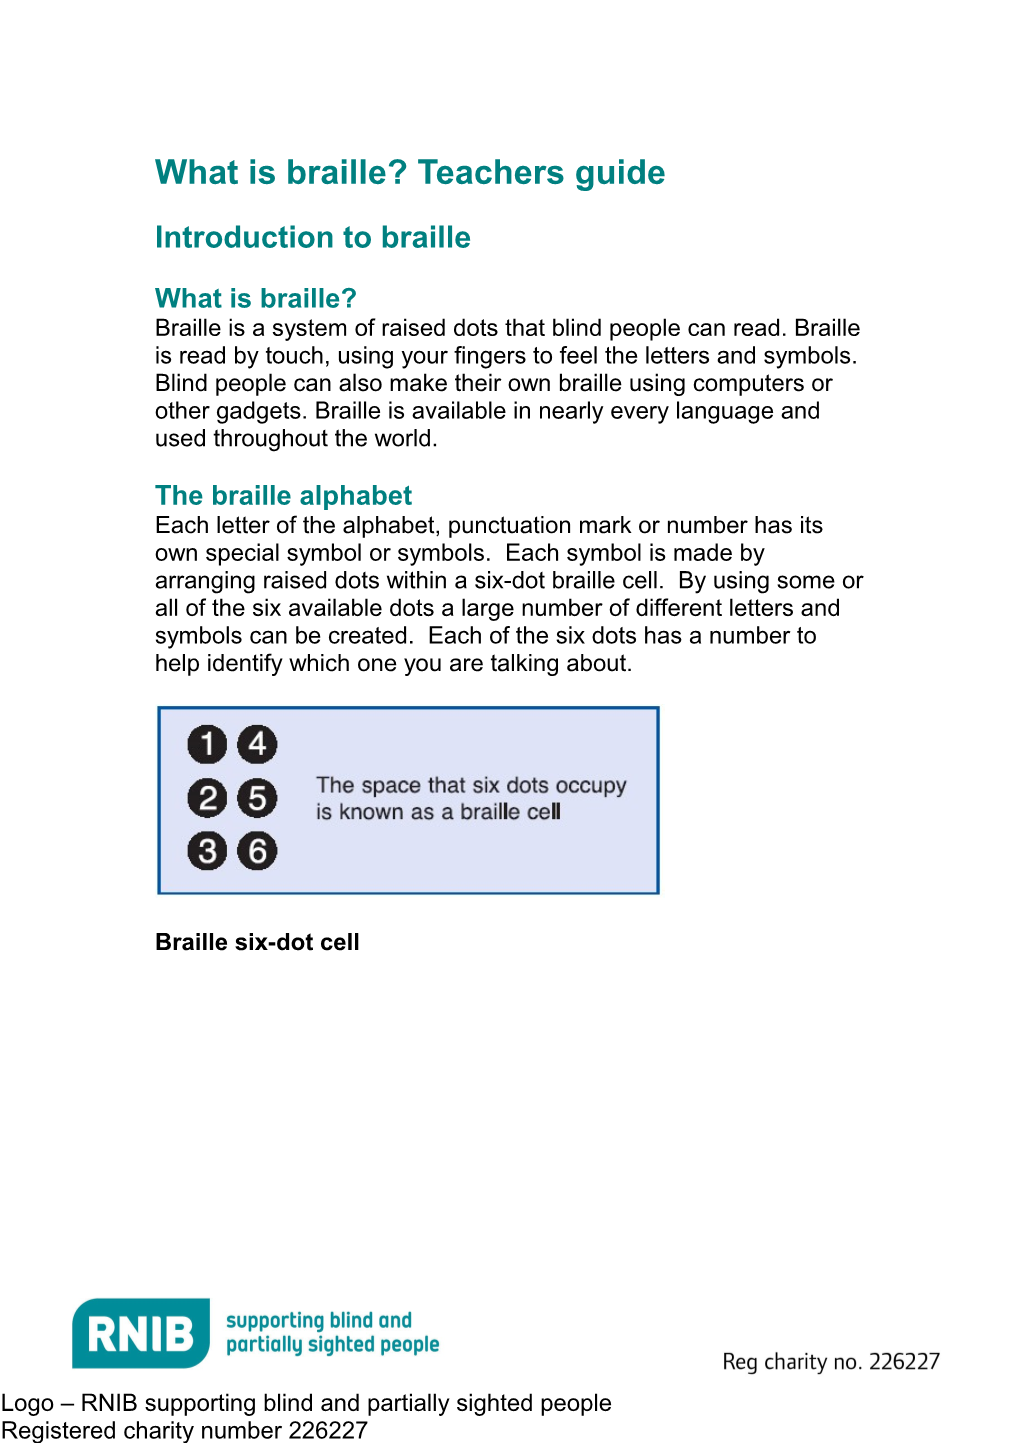 School Learning Pack: What Is Braille? Pupil Handout